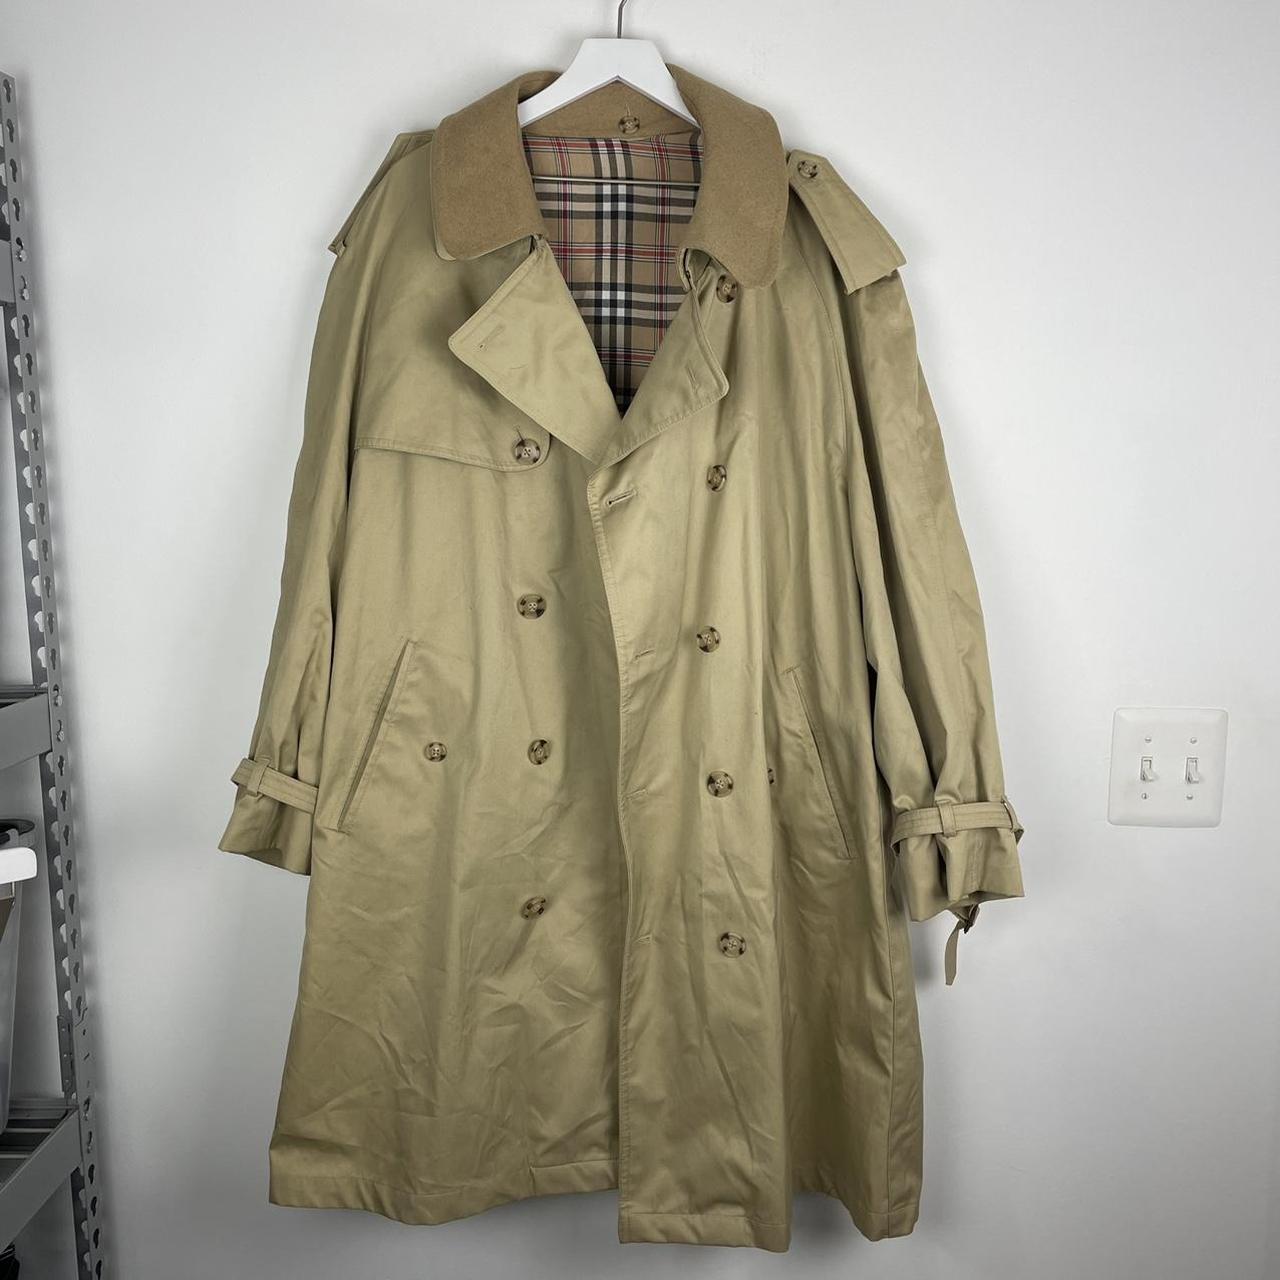 Burberry’s Vintage Trench Coat & Button Wool Lining... - Depop